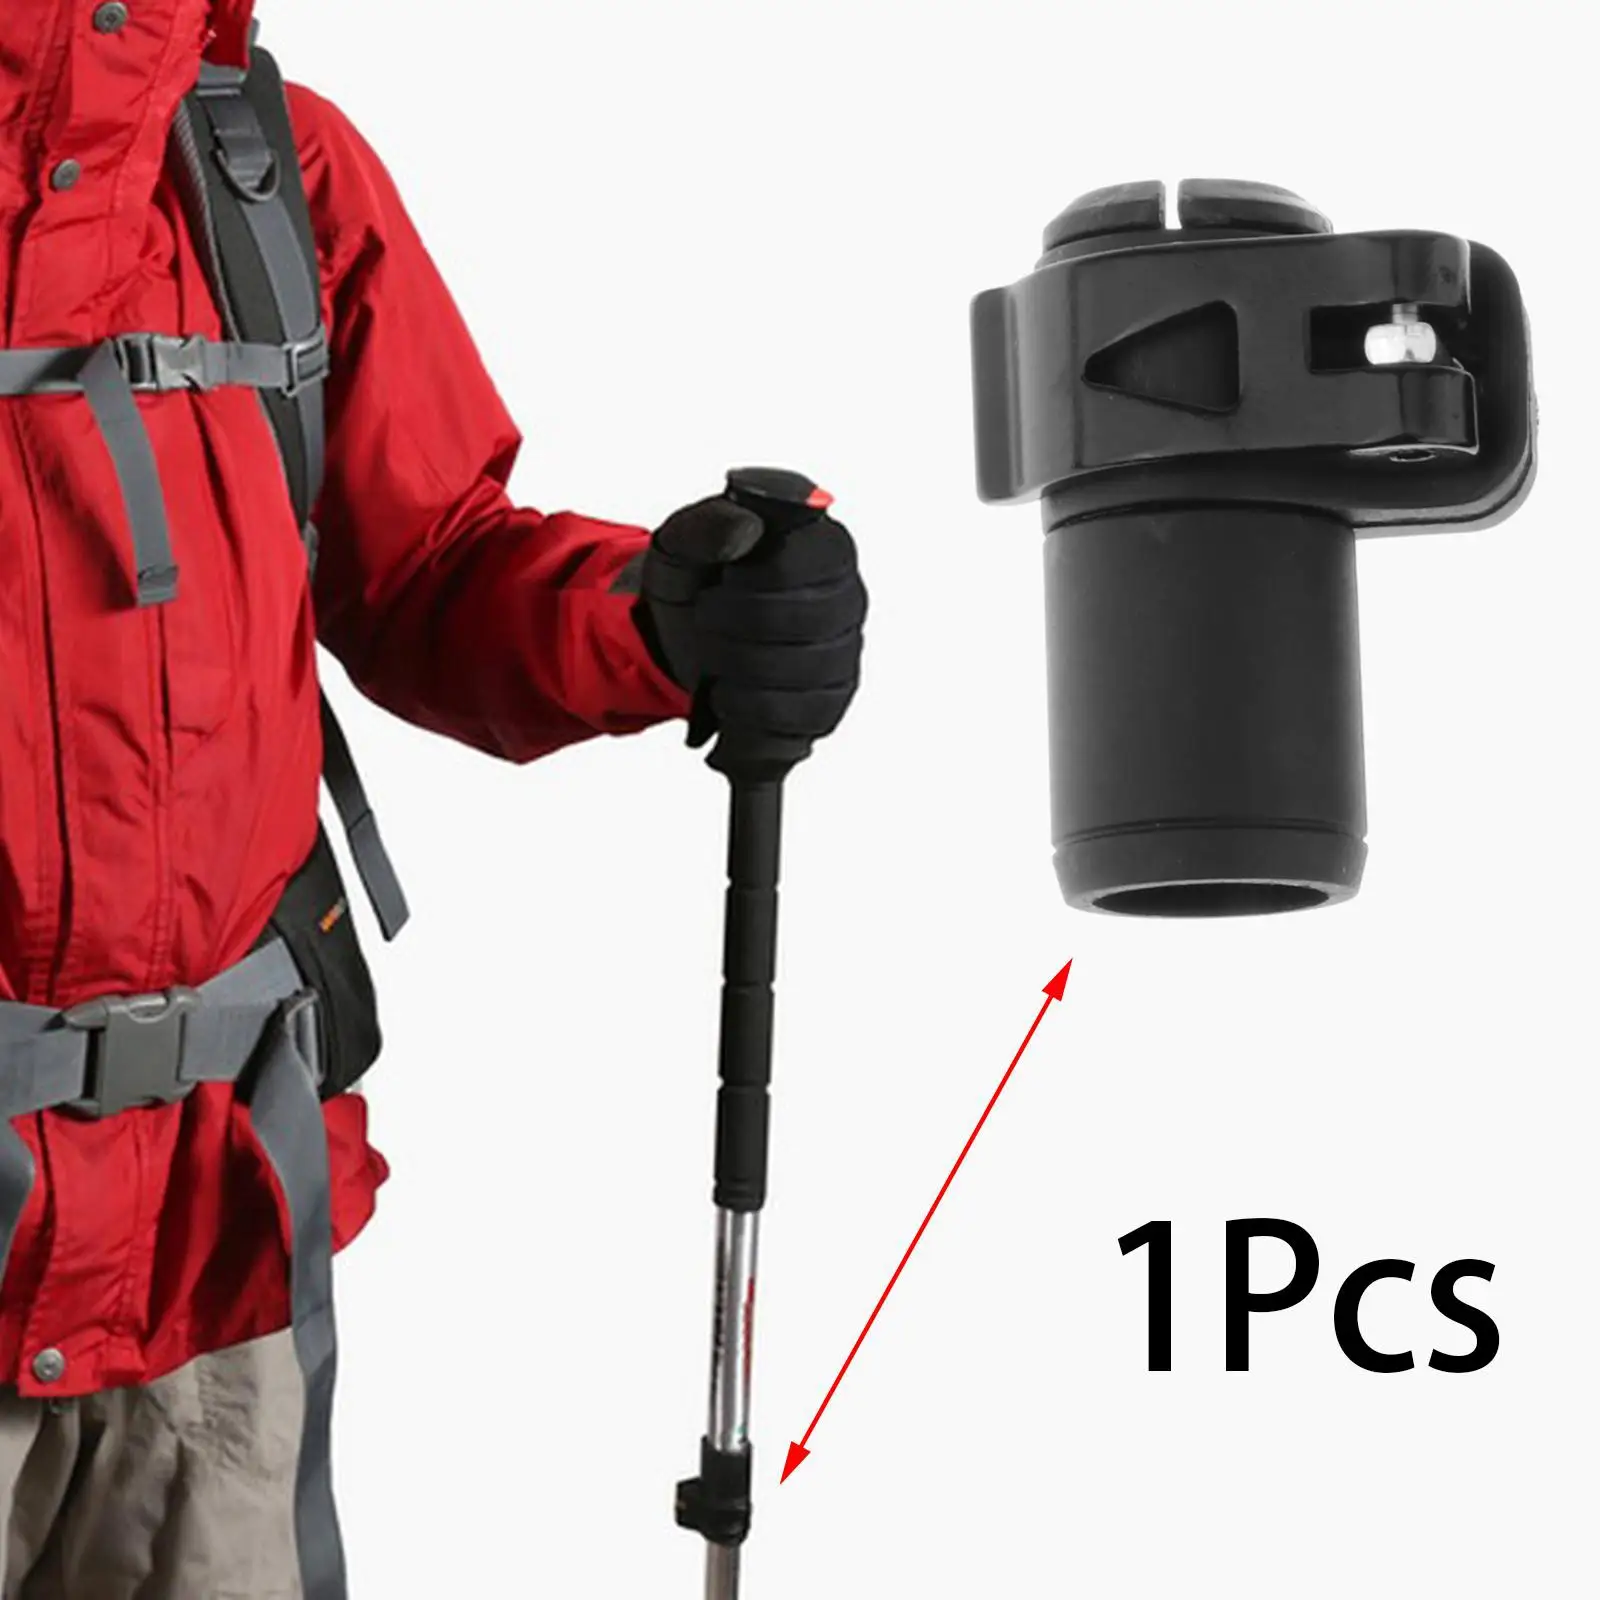 Walking Hiking Pole Accessories, Universal Quick Lock Durable, Walking Pole for Outdoor, Mountaineering